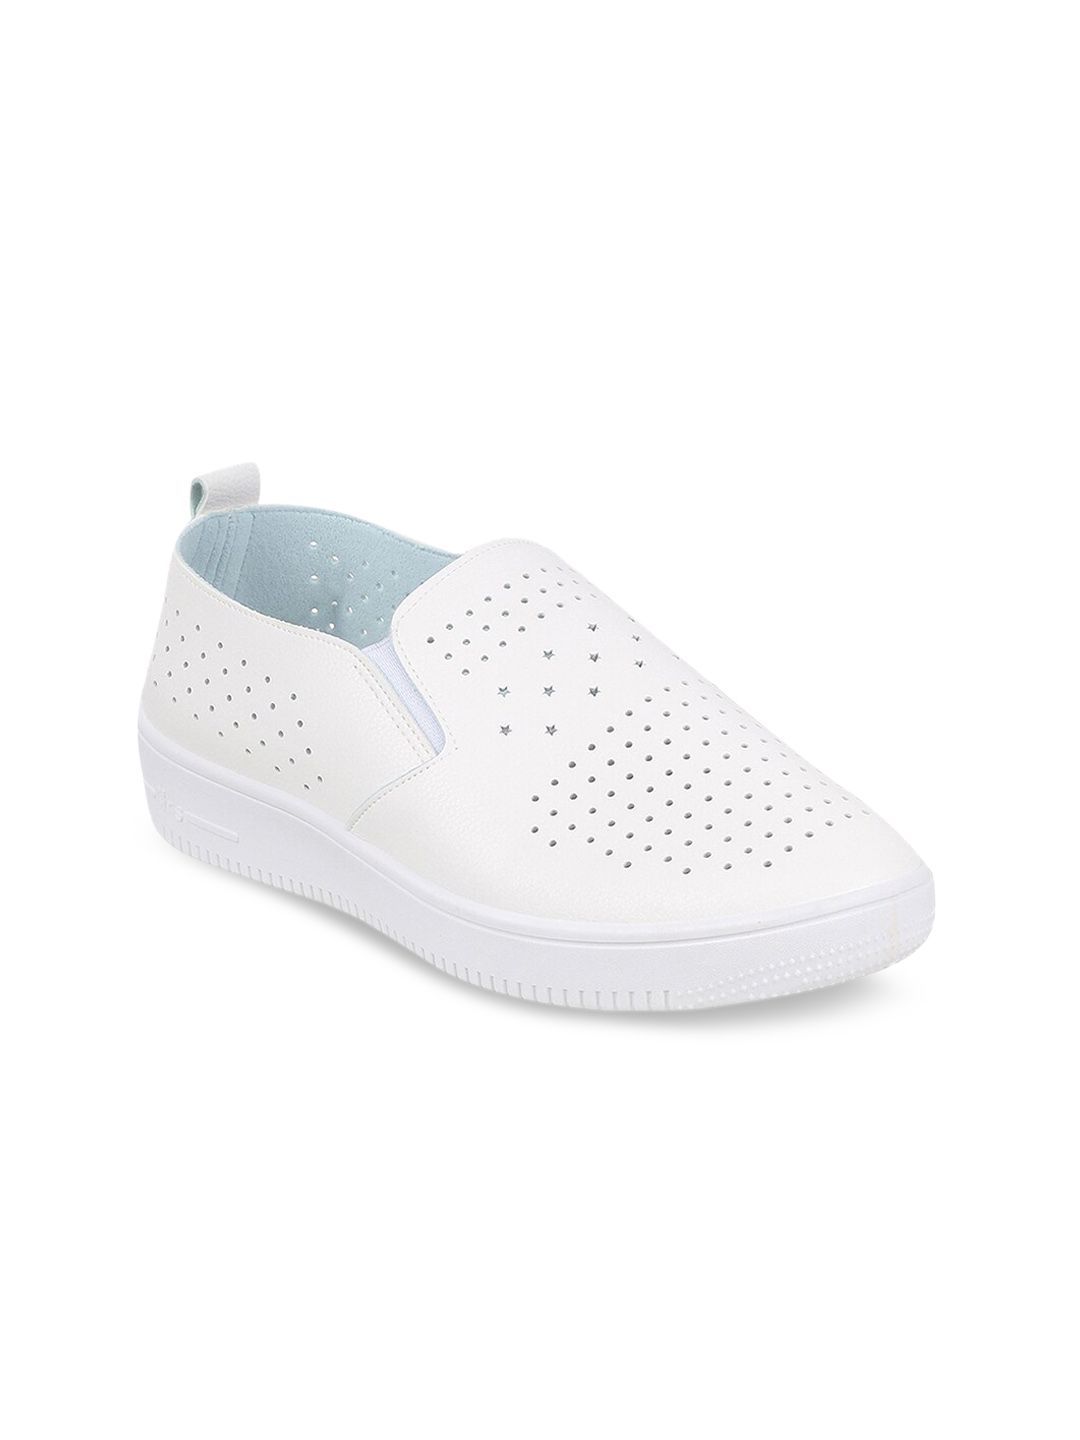 WALKWAY by Metro Women White Textured Synthetic Sneakers Price in India